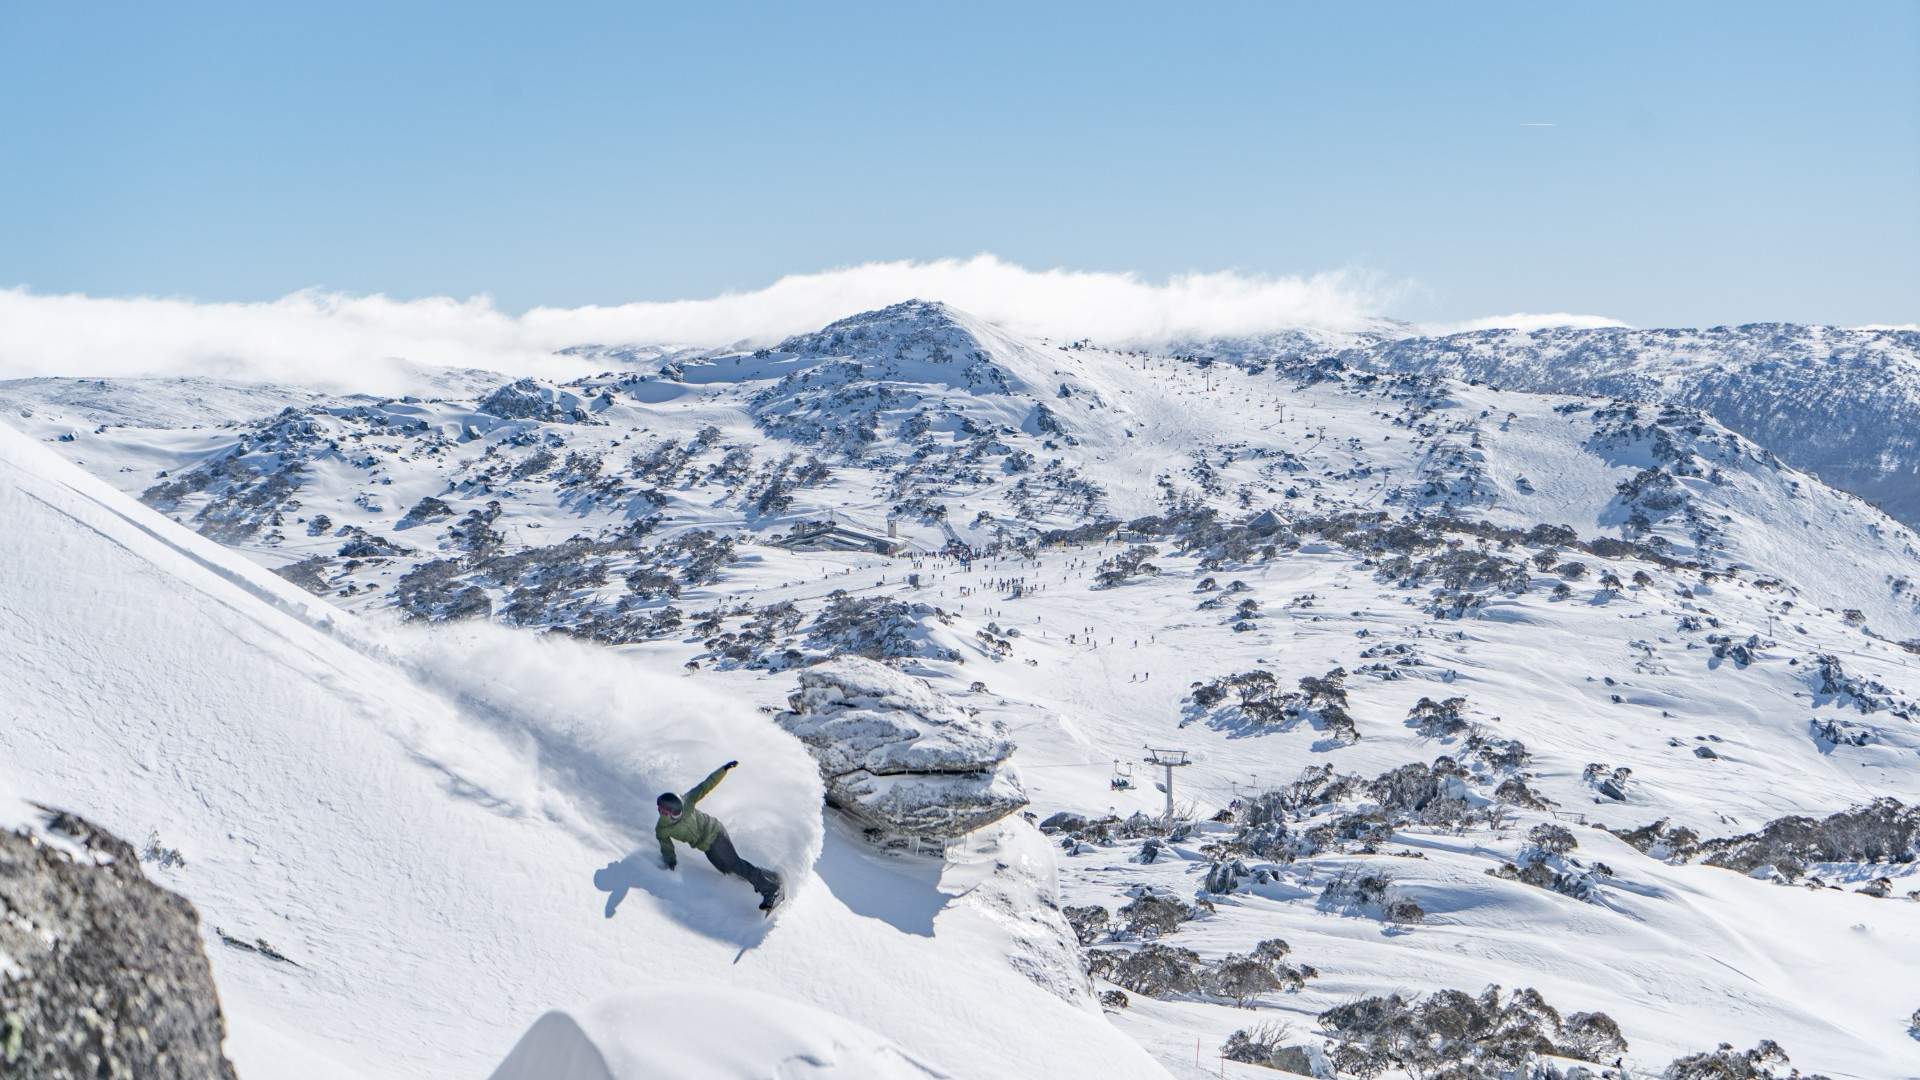 All of NSW's and Victoria's Major Snow Resorts Are Scheduled to Open By the End of June